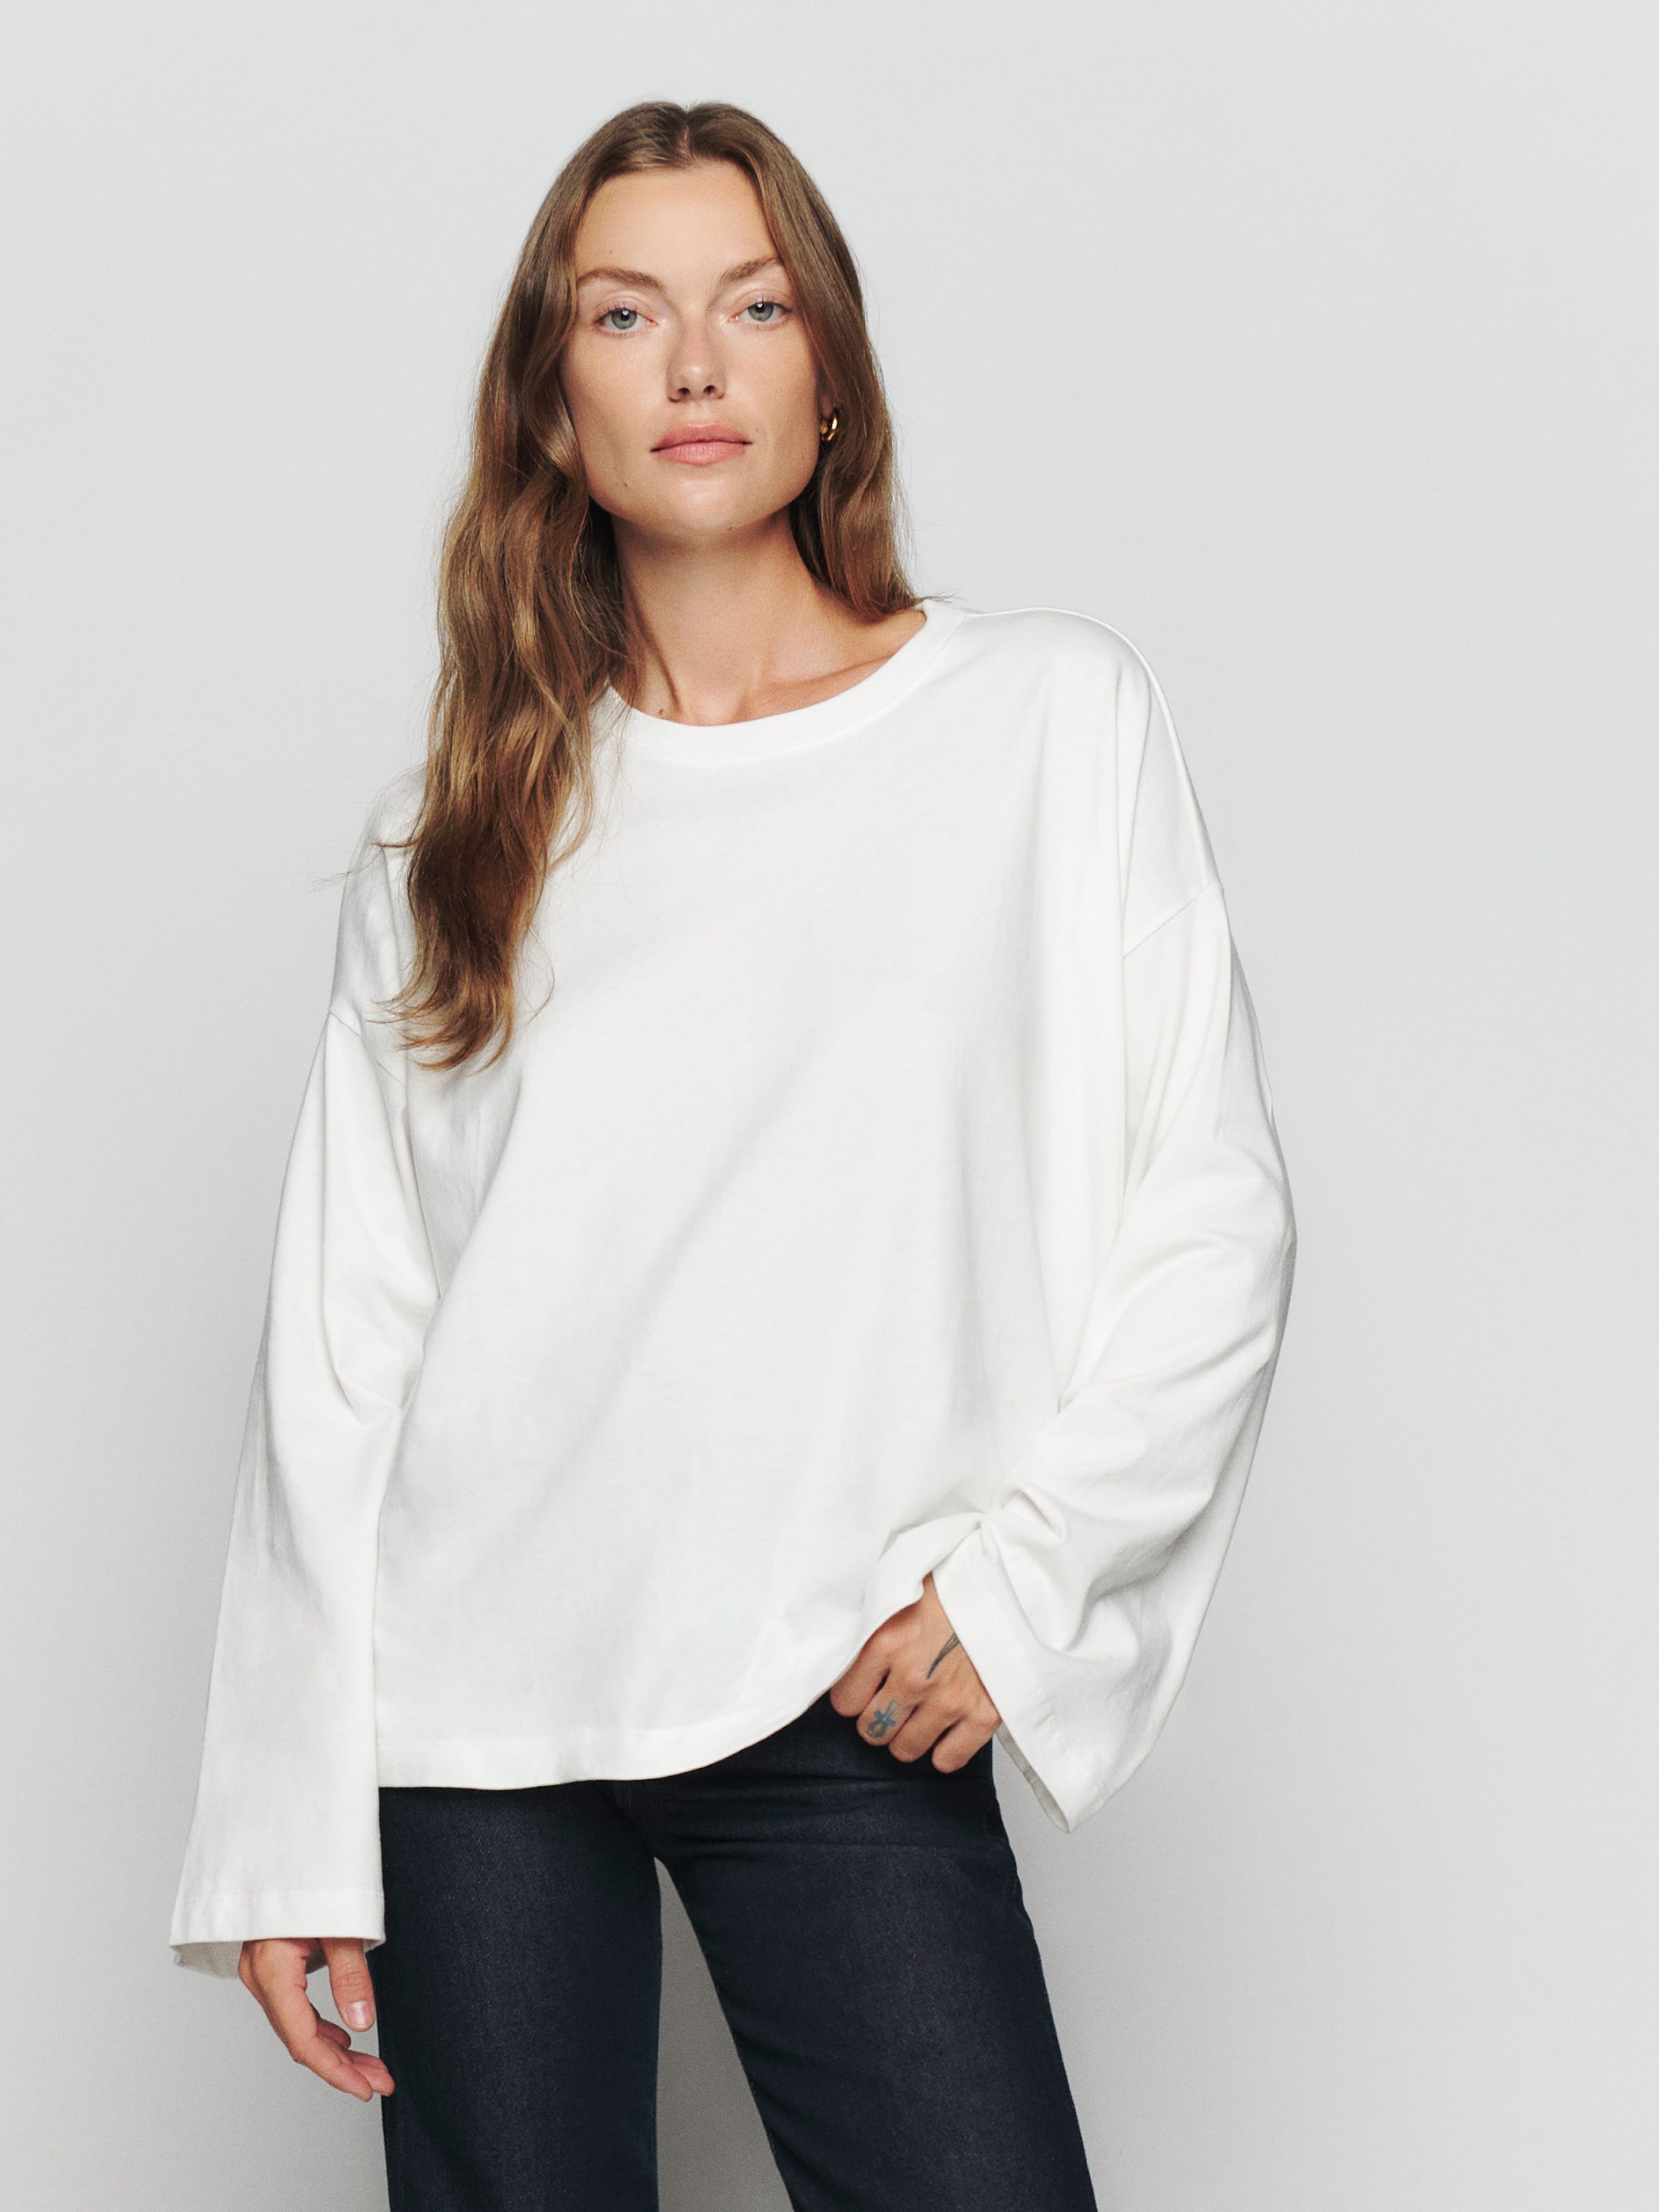 Reformation Oversized Long Sleeve Tee In White